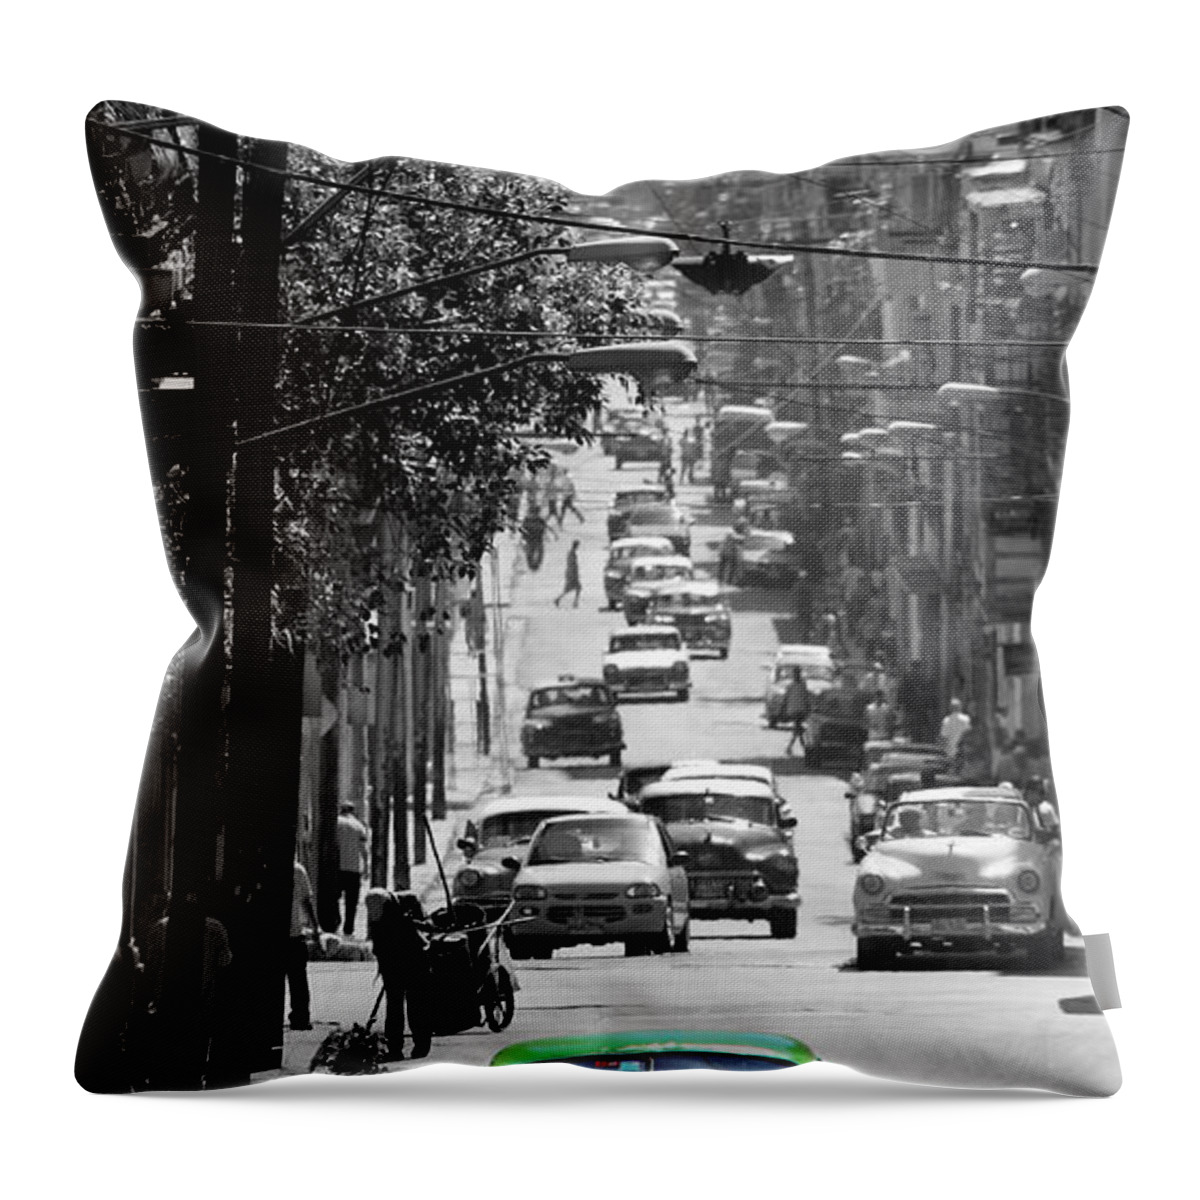 Havana Throw Pillow featuring the photograph Havana 25c by Andrew Fare